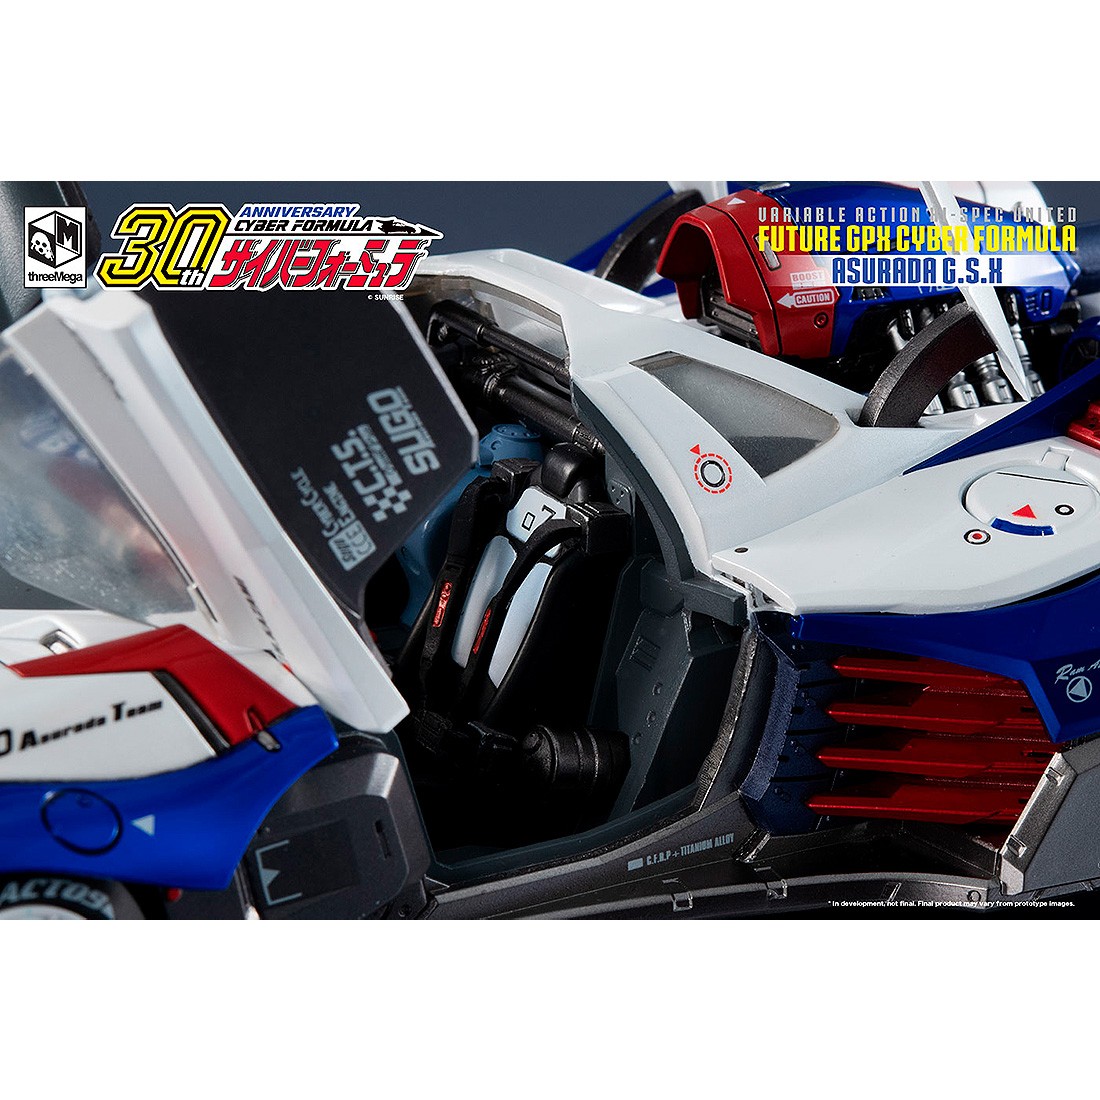 MegaHouse Variable Action Hi-SPEC UNITED Future GPX Cyber Formula 